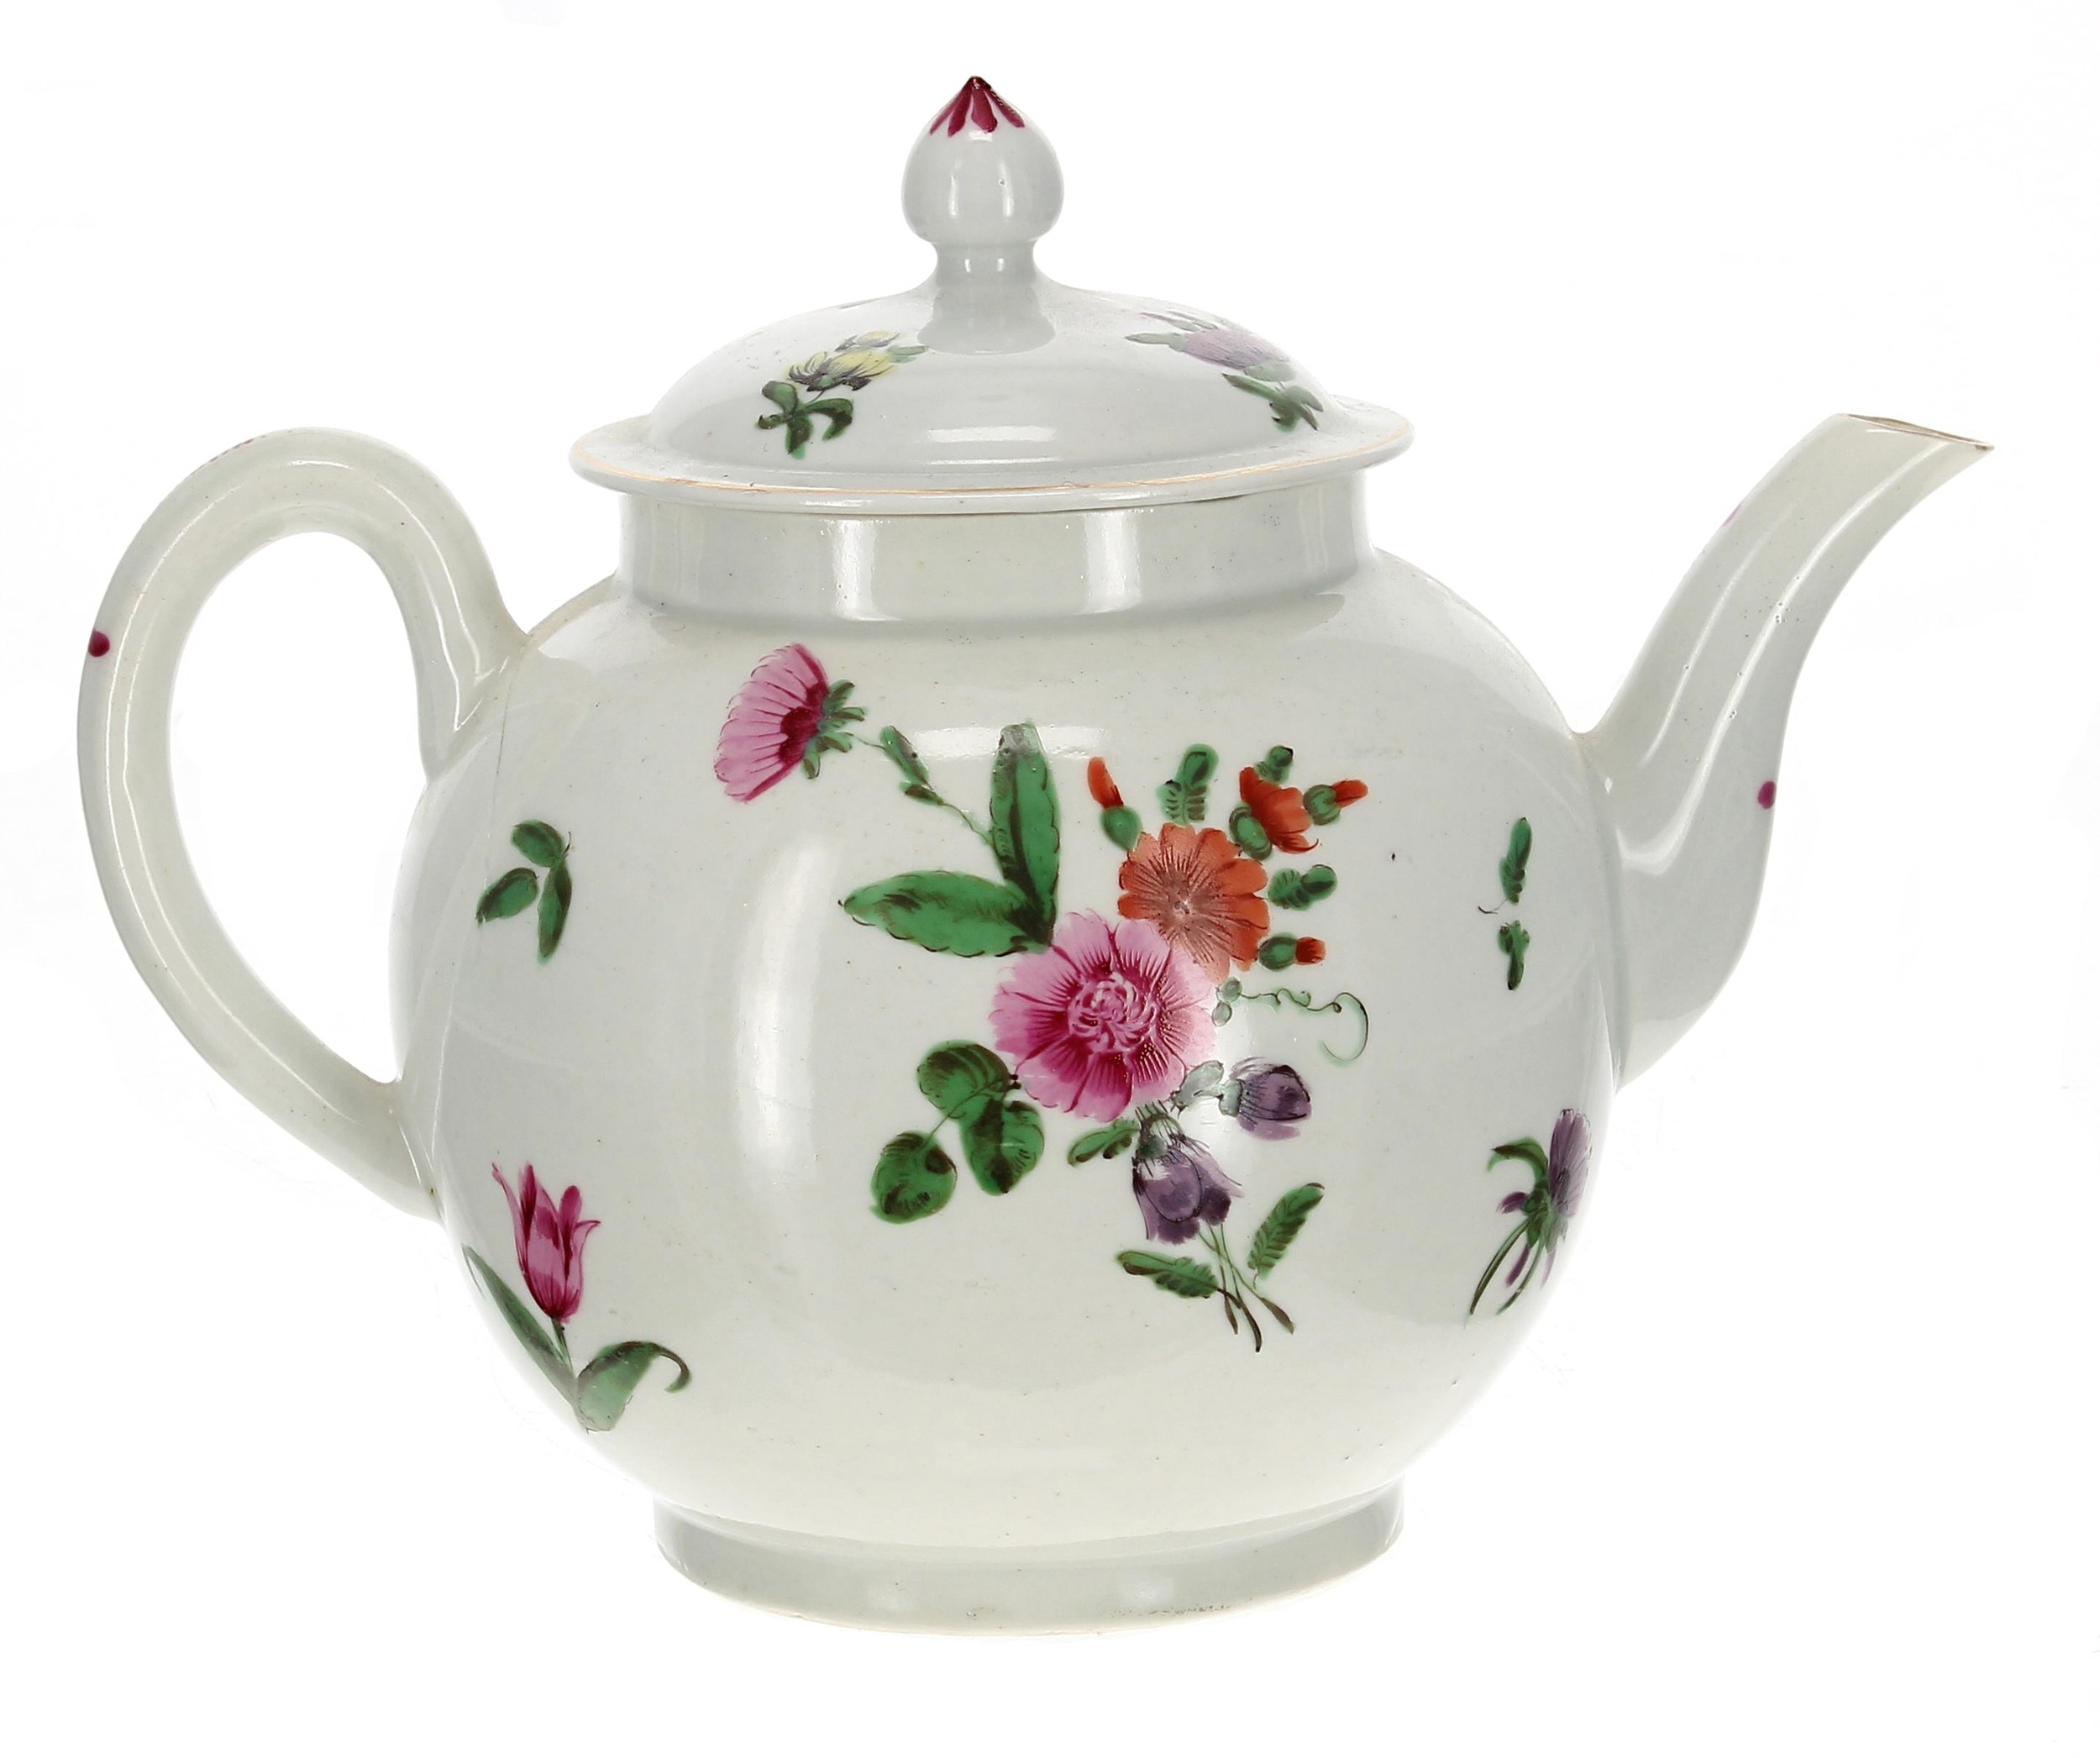 Late 18th century English porcelain teapot and cover, possibly Newhall, painted with flower - Image 3 of 6